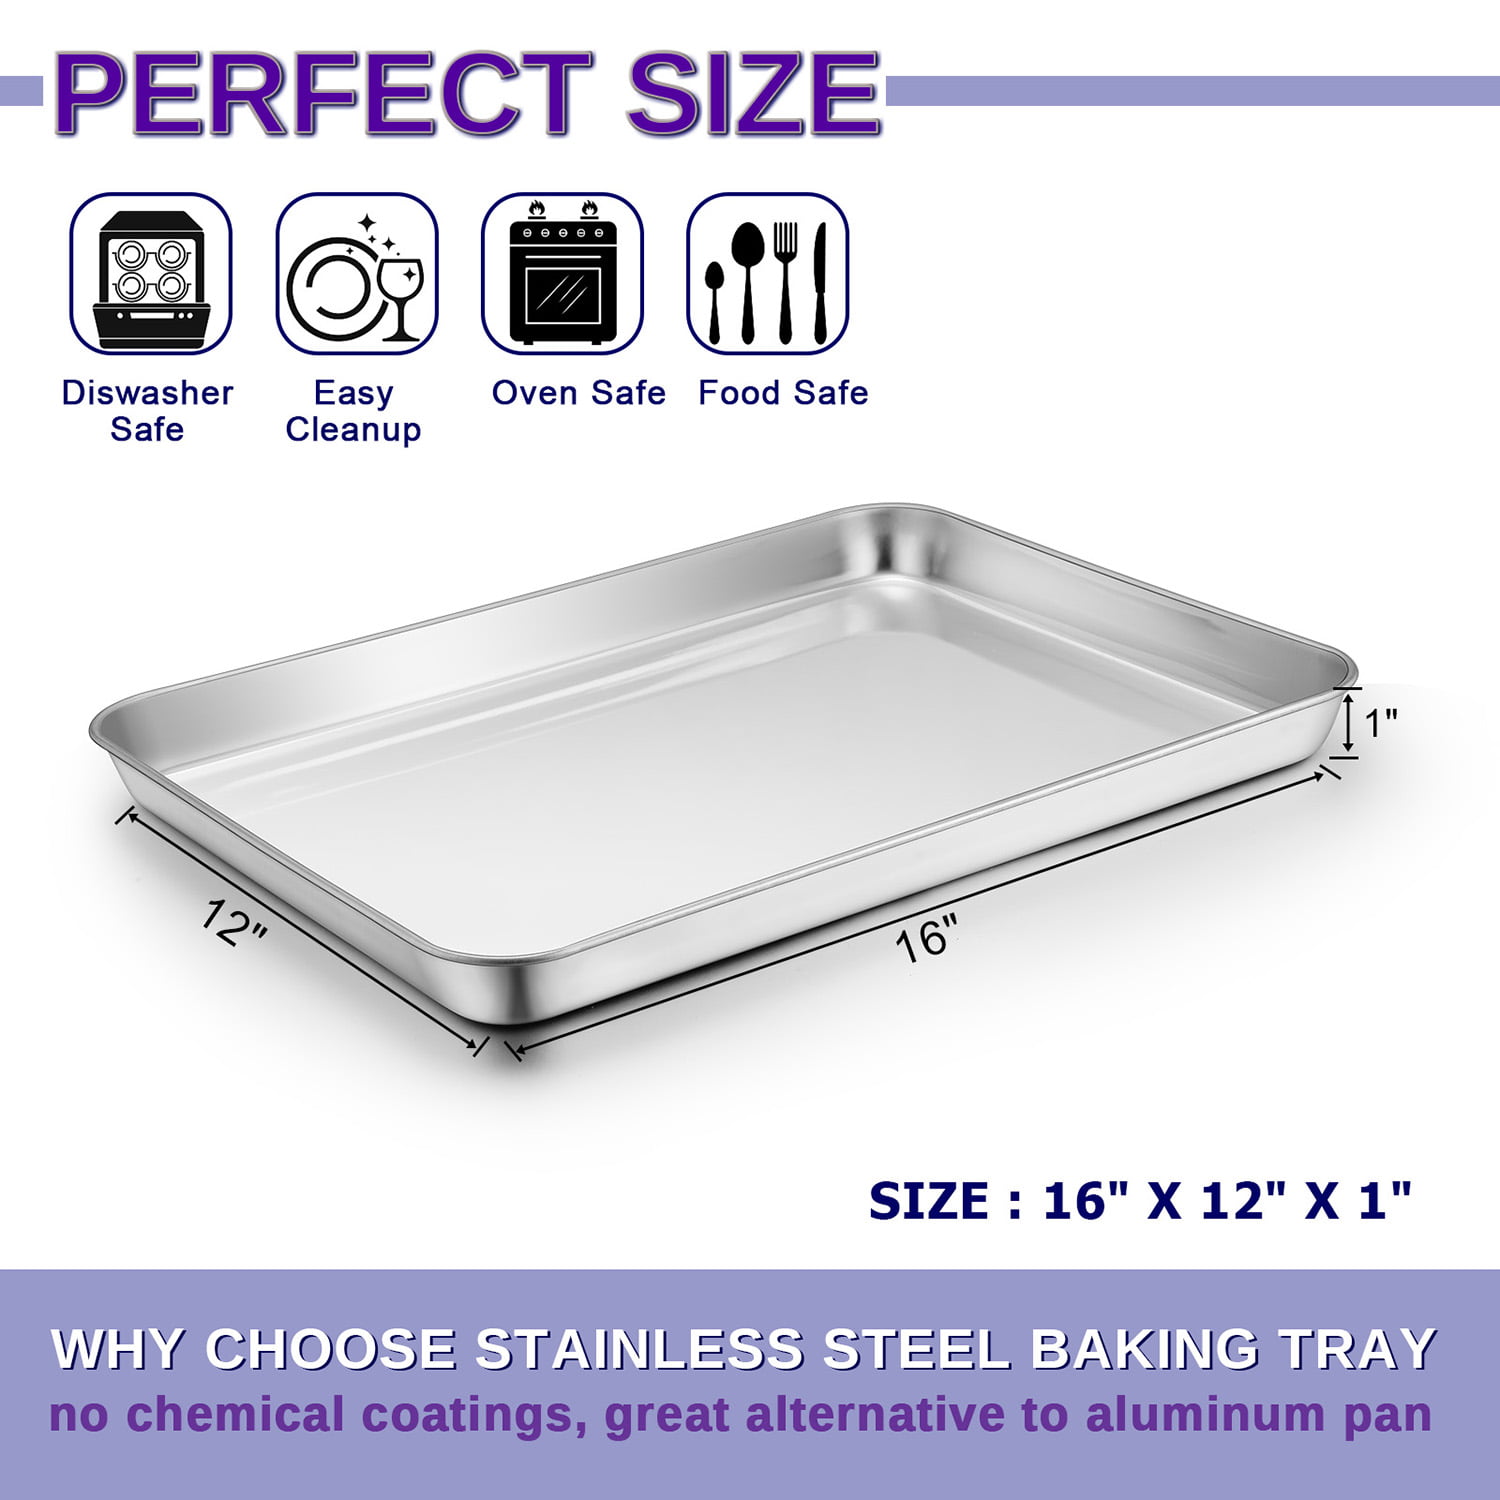  Metal Toaster Oven Tray with Rack Set, E-far 10.5”x8.3” Baking  Sheet Broiling Pan with Stainless Steel Wire Grate Rack for Cooking Baking  Bacon Steak Cooling Cookie - Dishwasher Safe: Home 